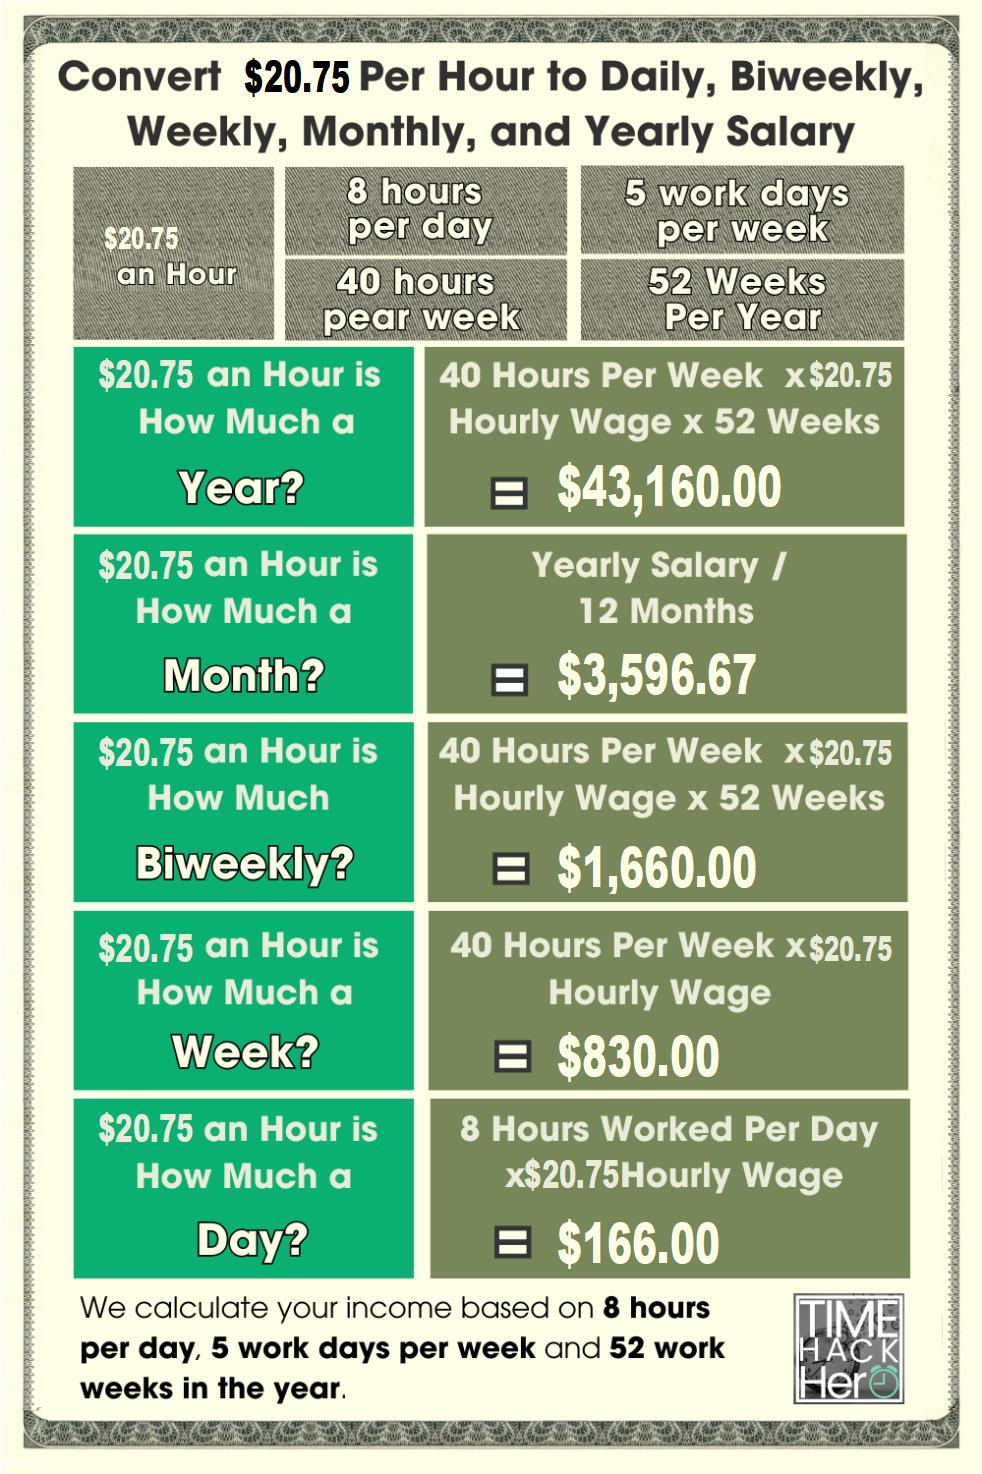 Convert $20.75 Per Hour to Weekly, Monthly, and Yearly Salary